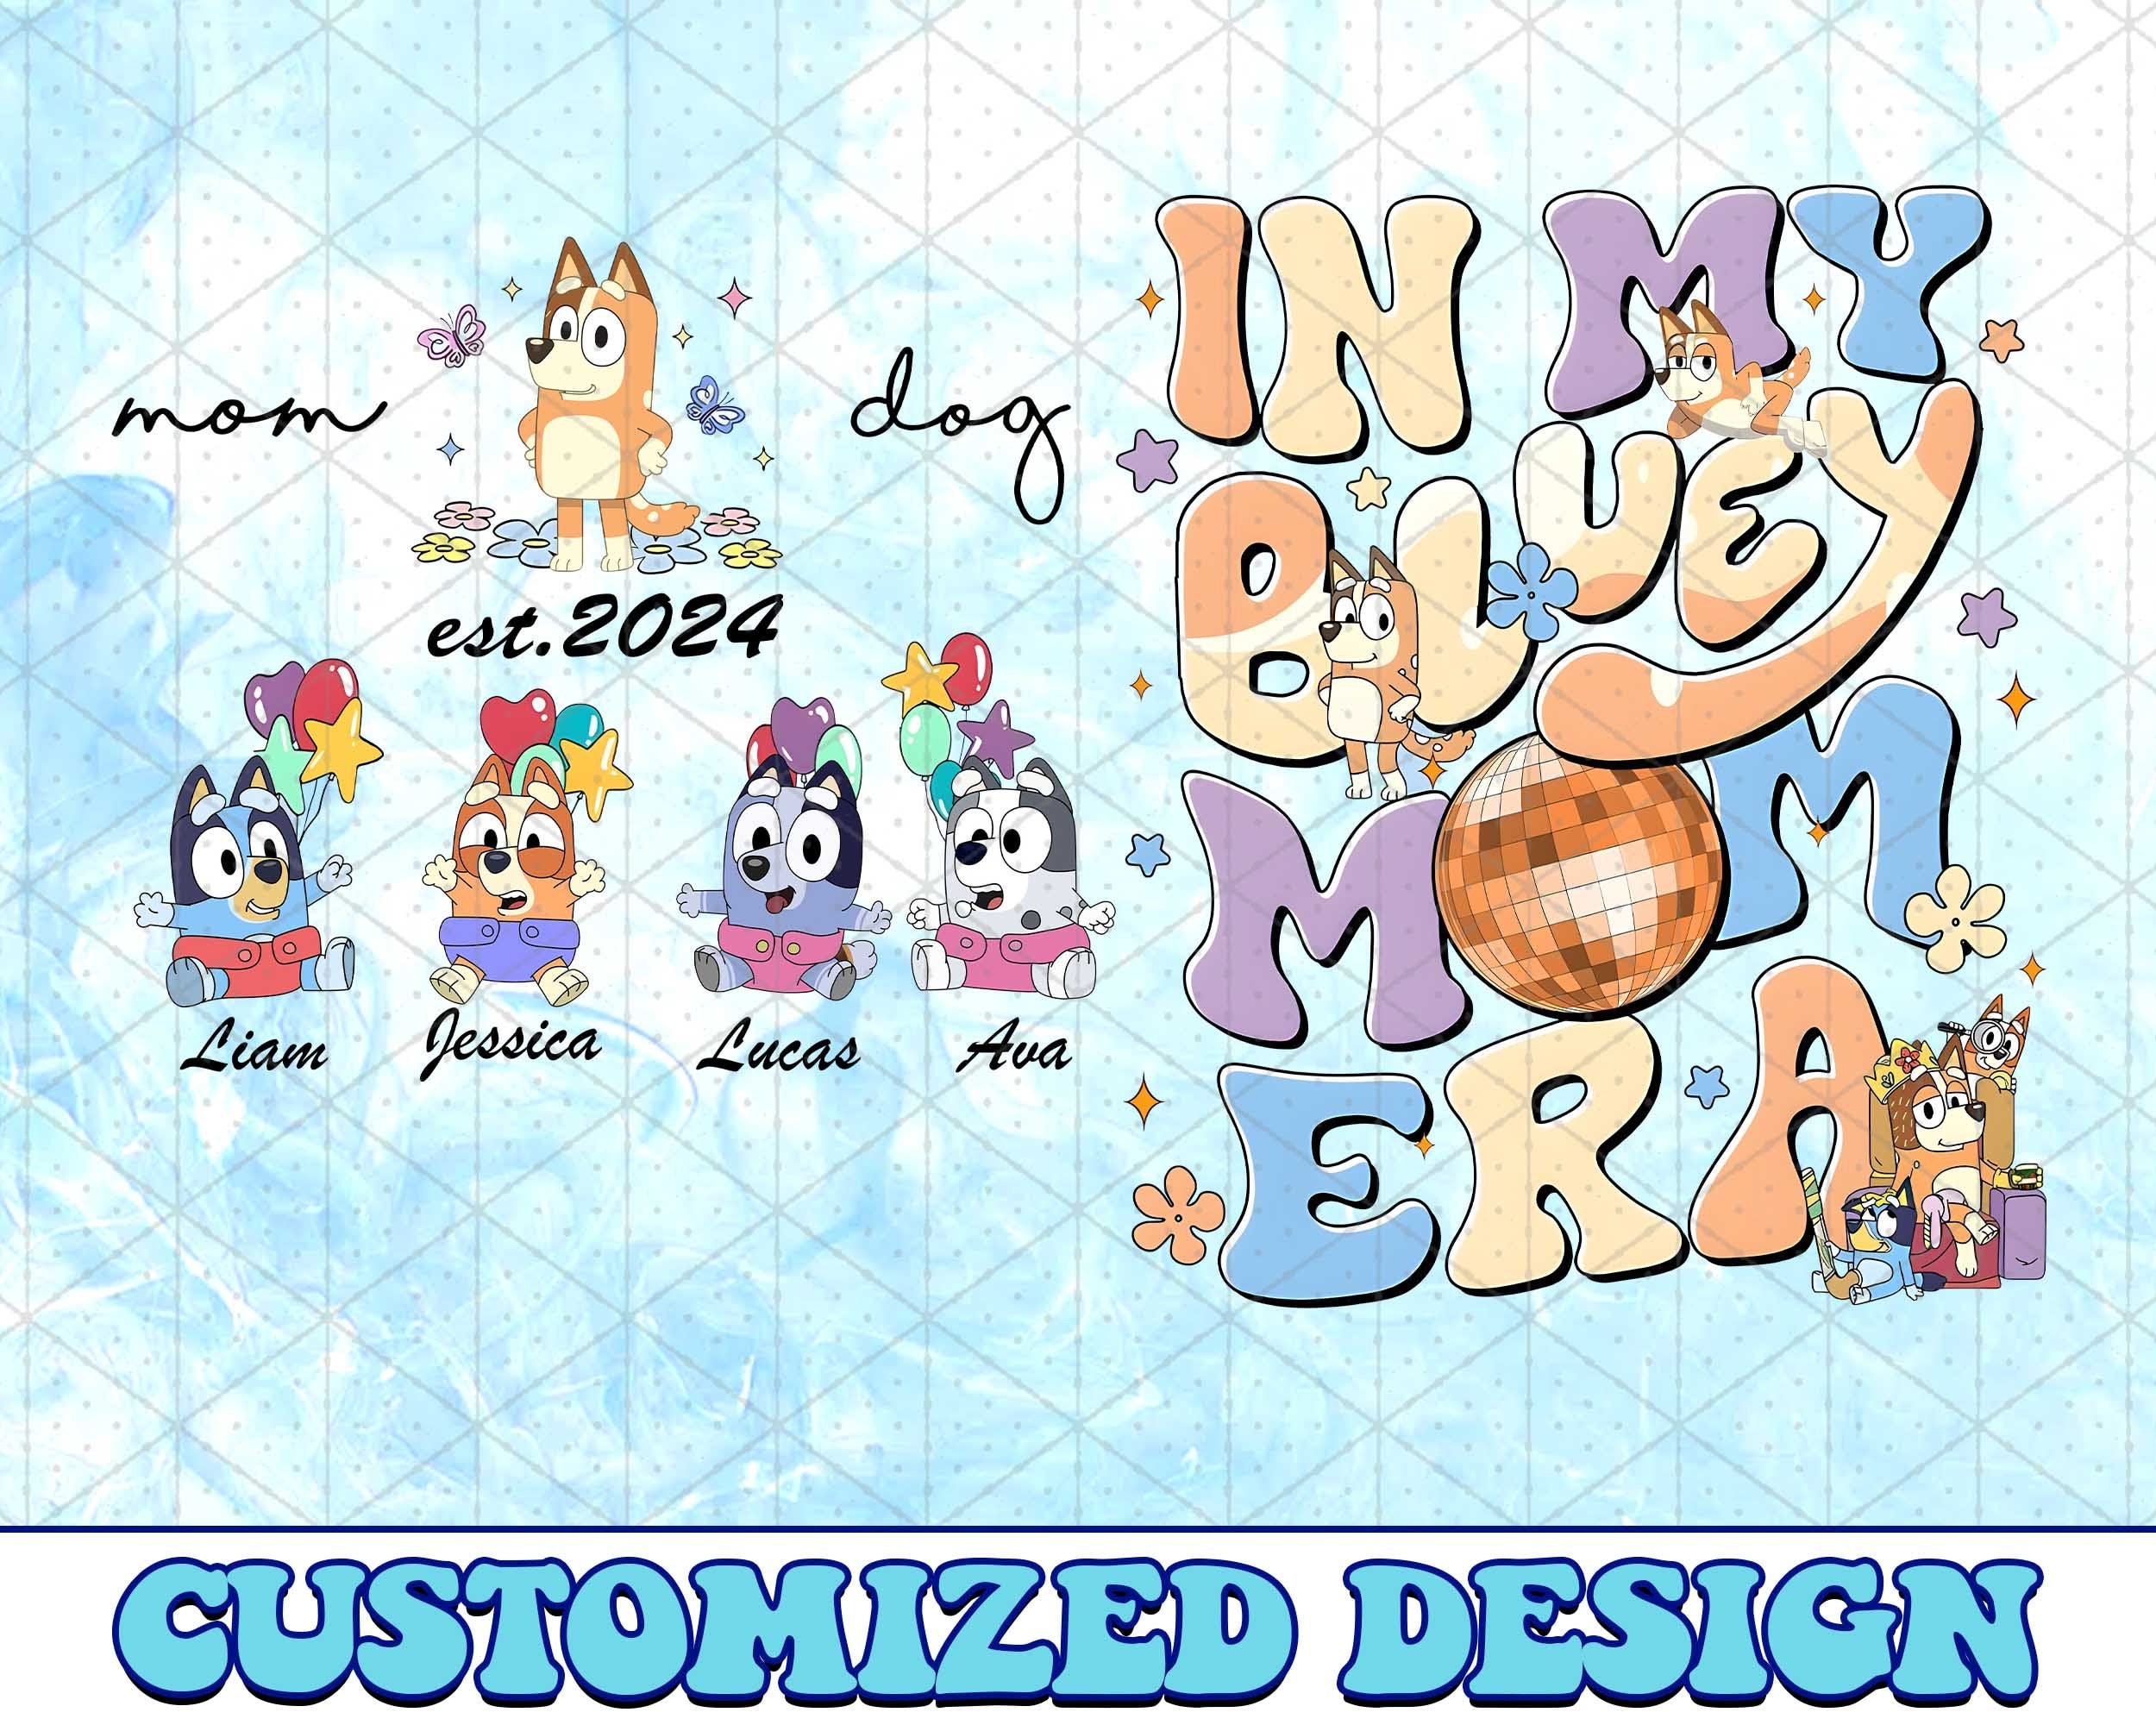 Customized Bluey Mom PNG, Bluey Family PNG, Bluey The Eras Tour Png, Bluey Bingo Png, Bluey Mom Png, Bluey Dad Png, Bluey Friends Png